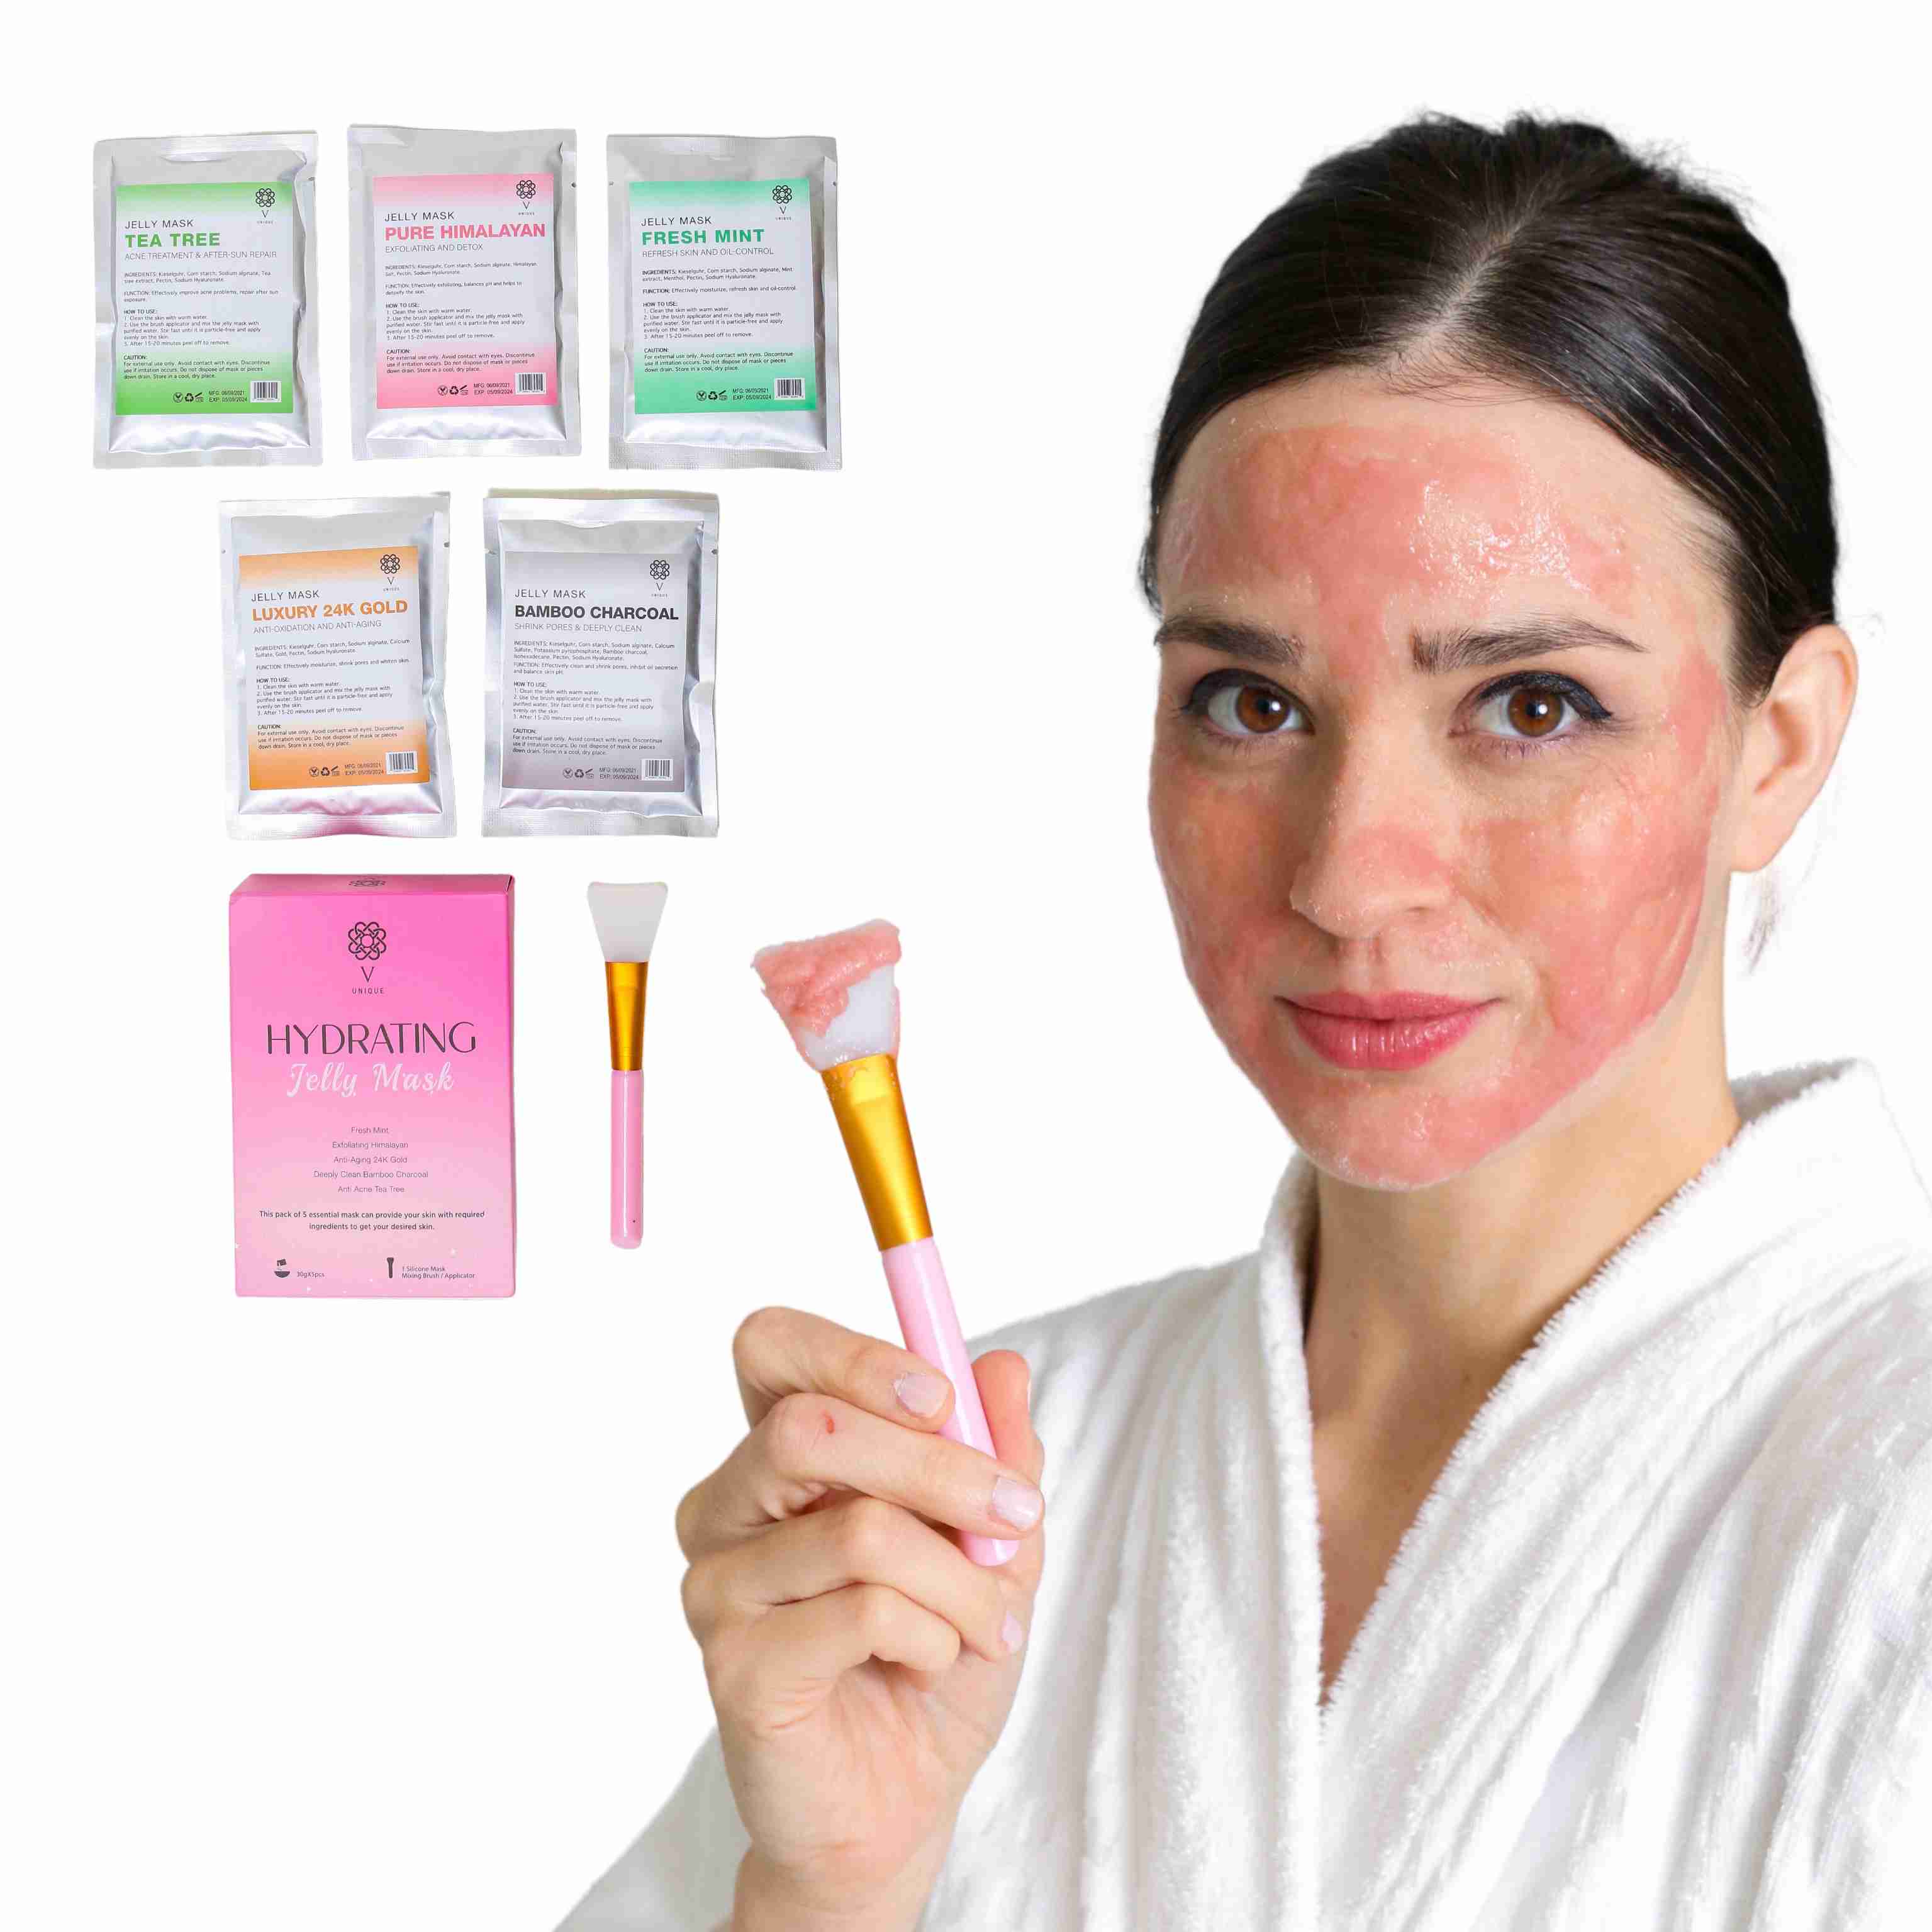 face-mask-v-unique-jelly-mask-vajacial-relax-body-skin-healr with cash back rebate